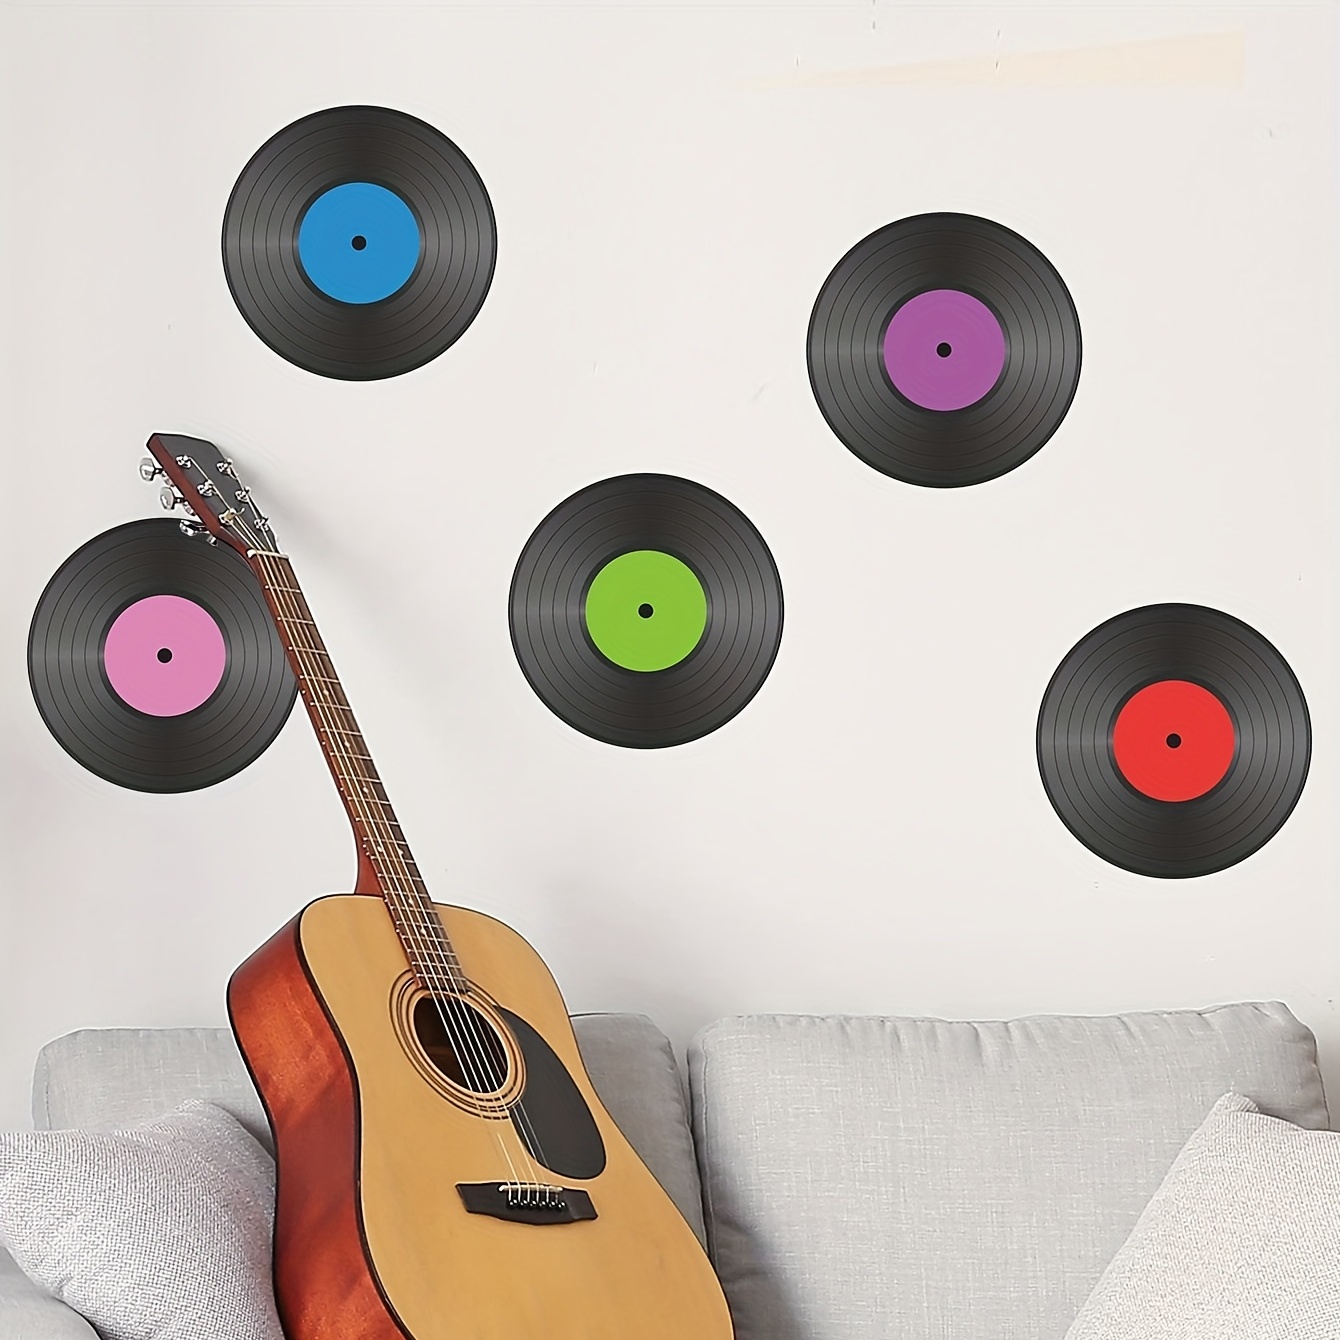 12 Pieces Vinyl Records Decor Blank Vinyl Records for Wall Aesthetic, 12  Inch Fake Vinyl Records Plain Record Decorations for Home Studio Room,  Discs